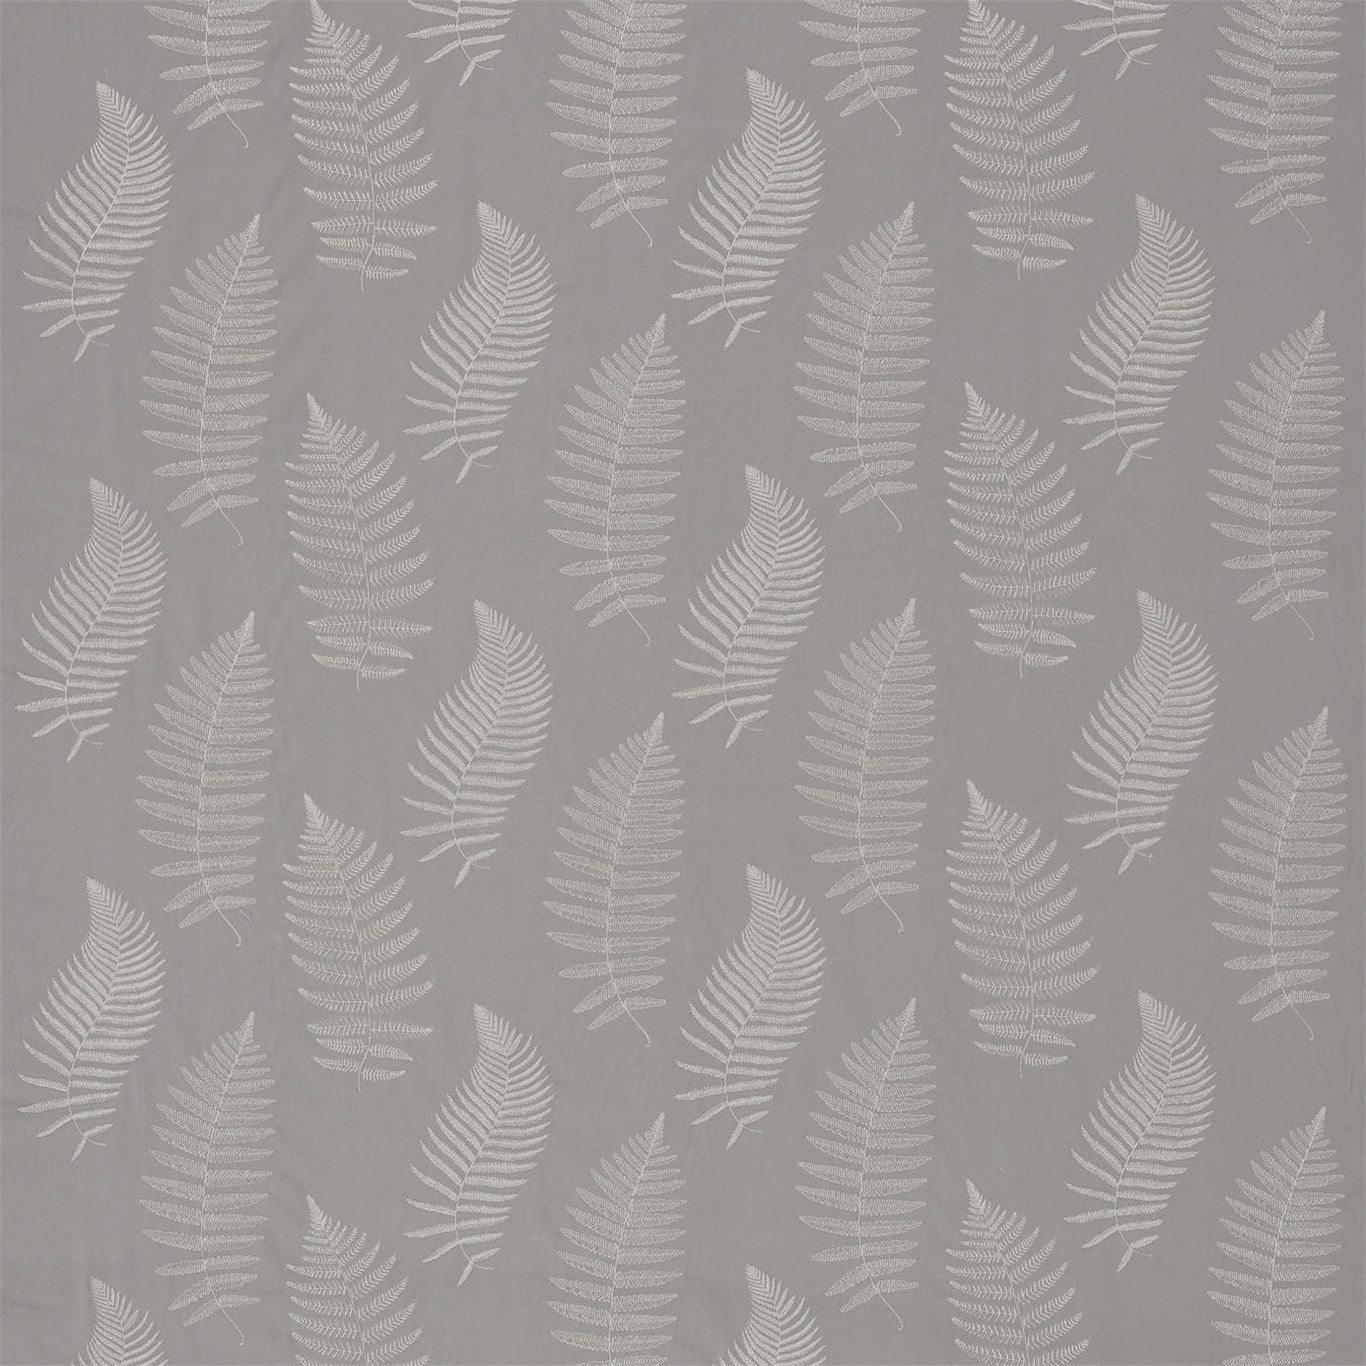 Fern Embroidery Pebble Fabric By Sanderson